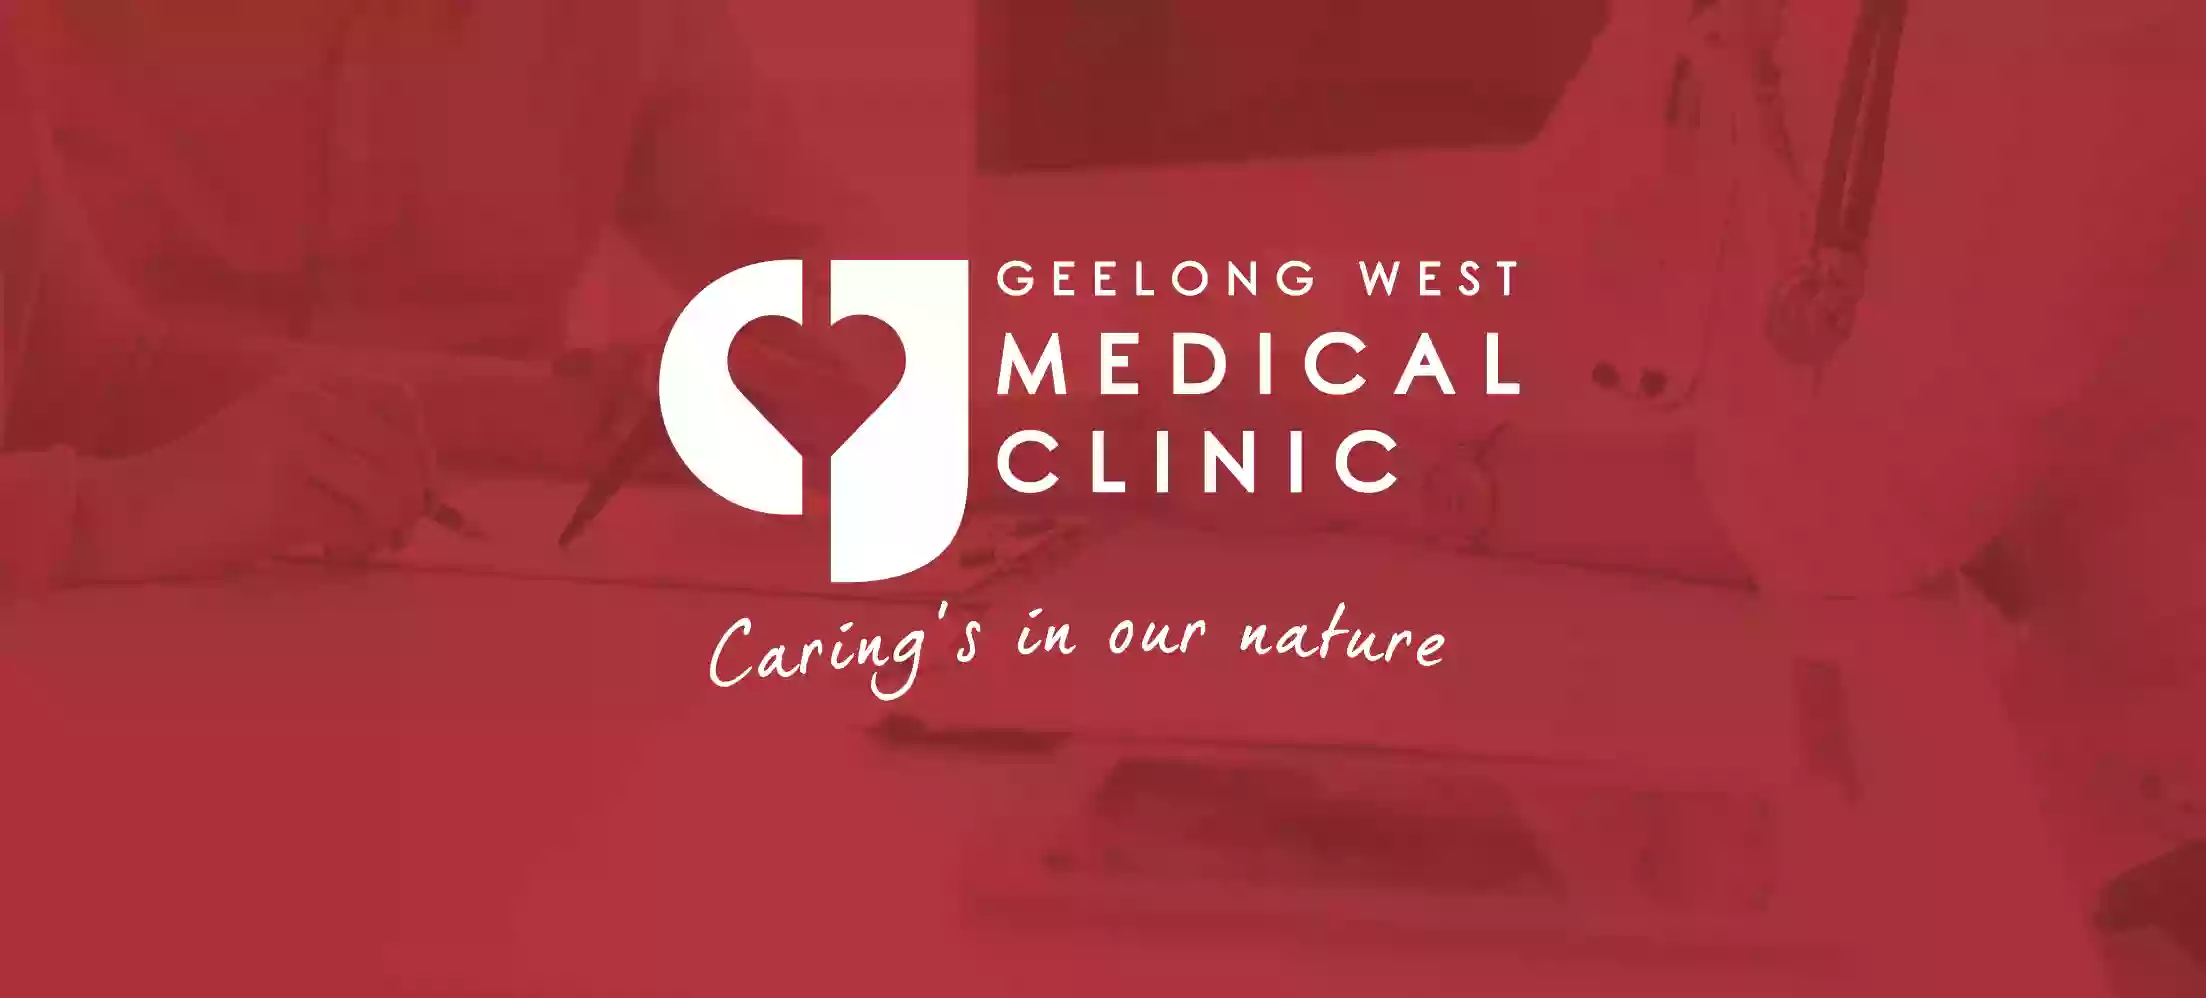 Geelong West Medical Clinic